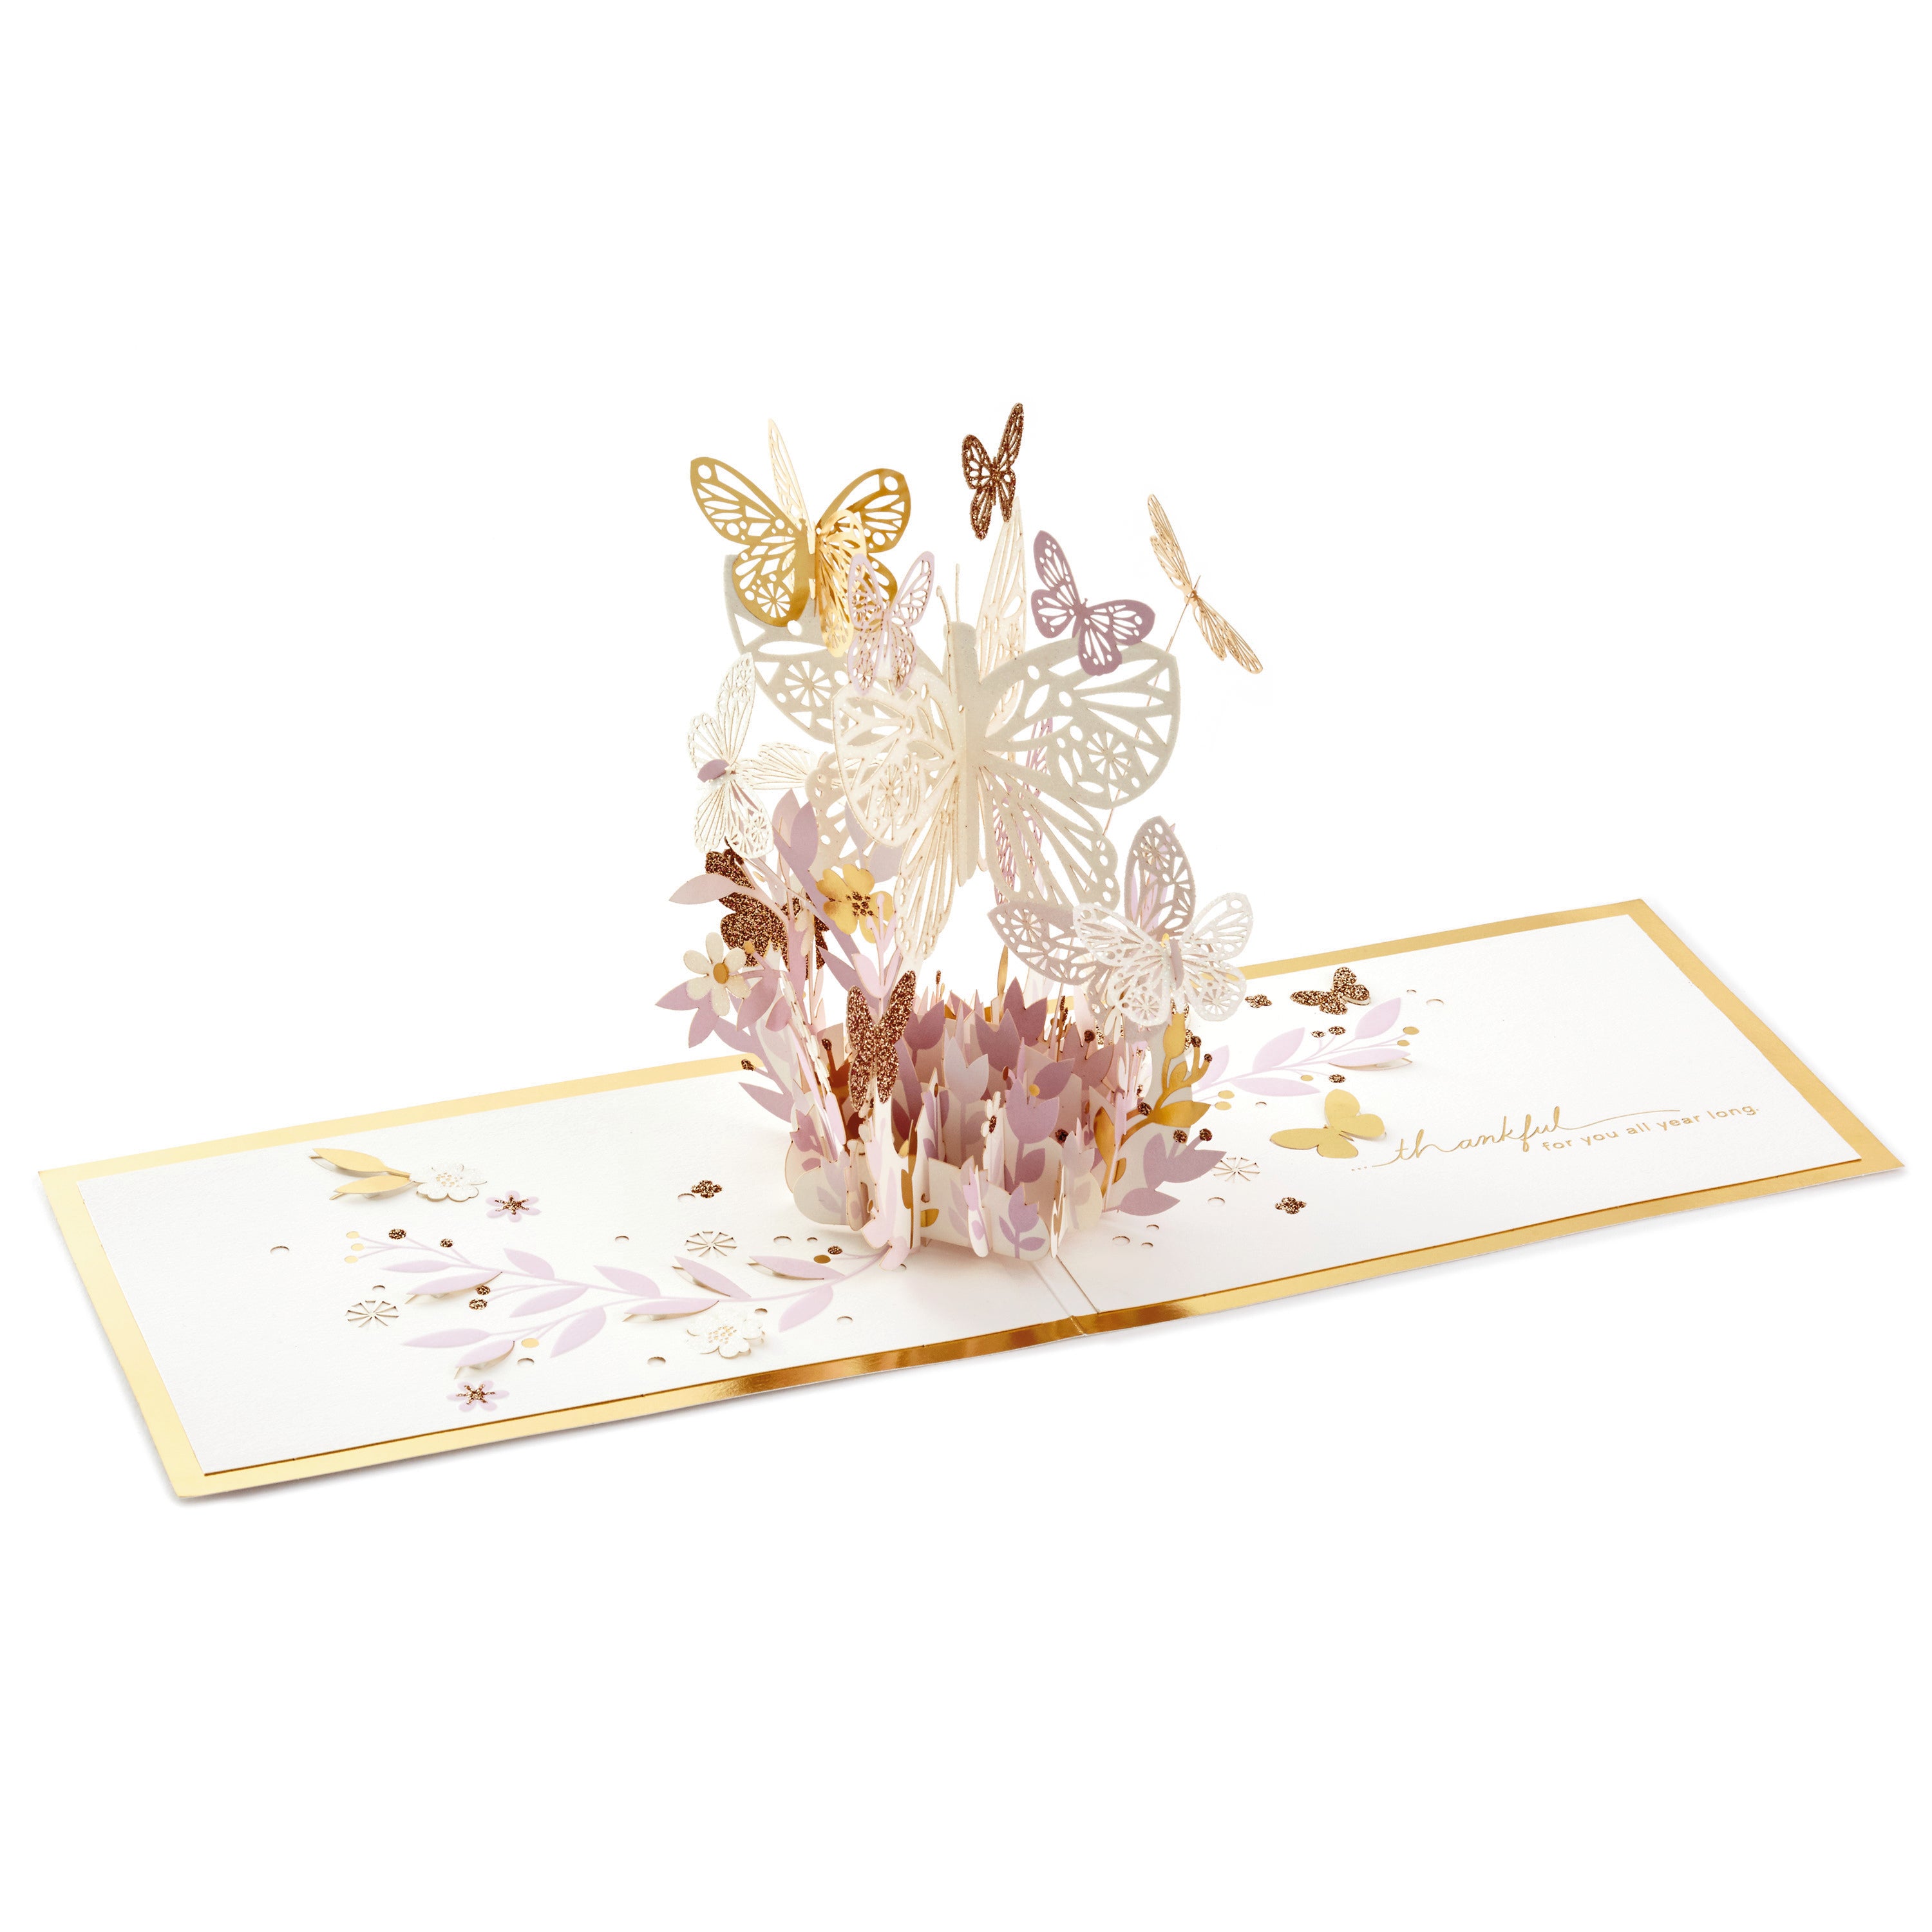 Signature Paper Wonder Pop Up Card, Thankful for You (Thinking of You Card or Birthday Card)